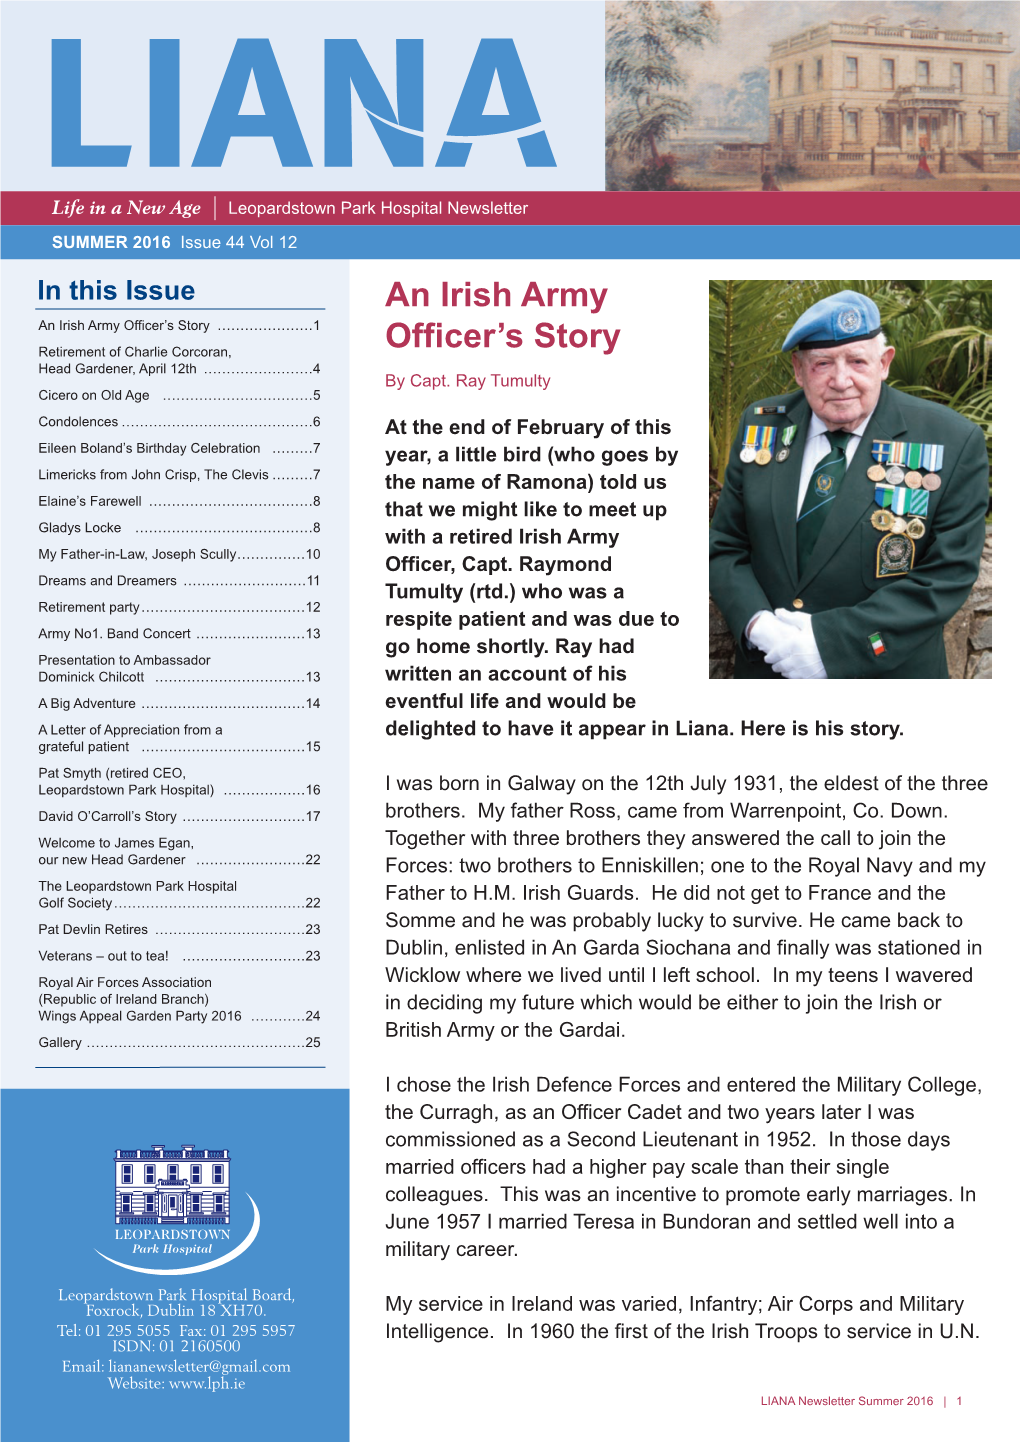 An Irish Army Officer's Story